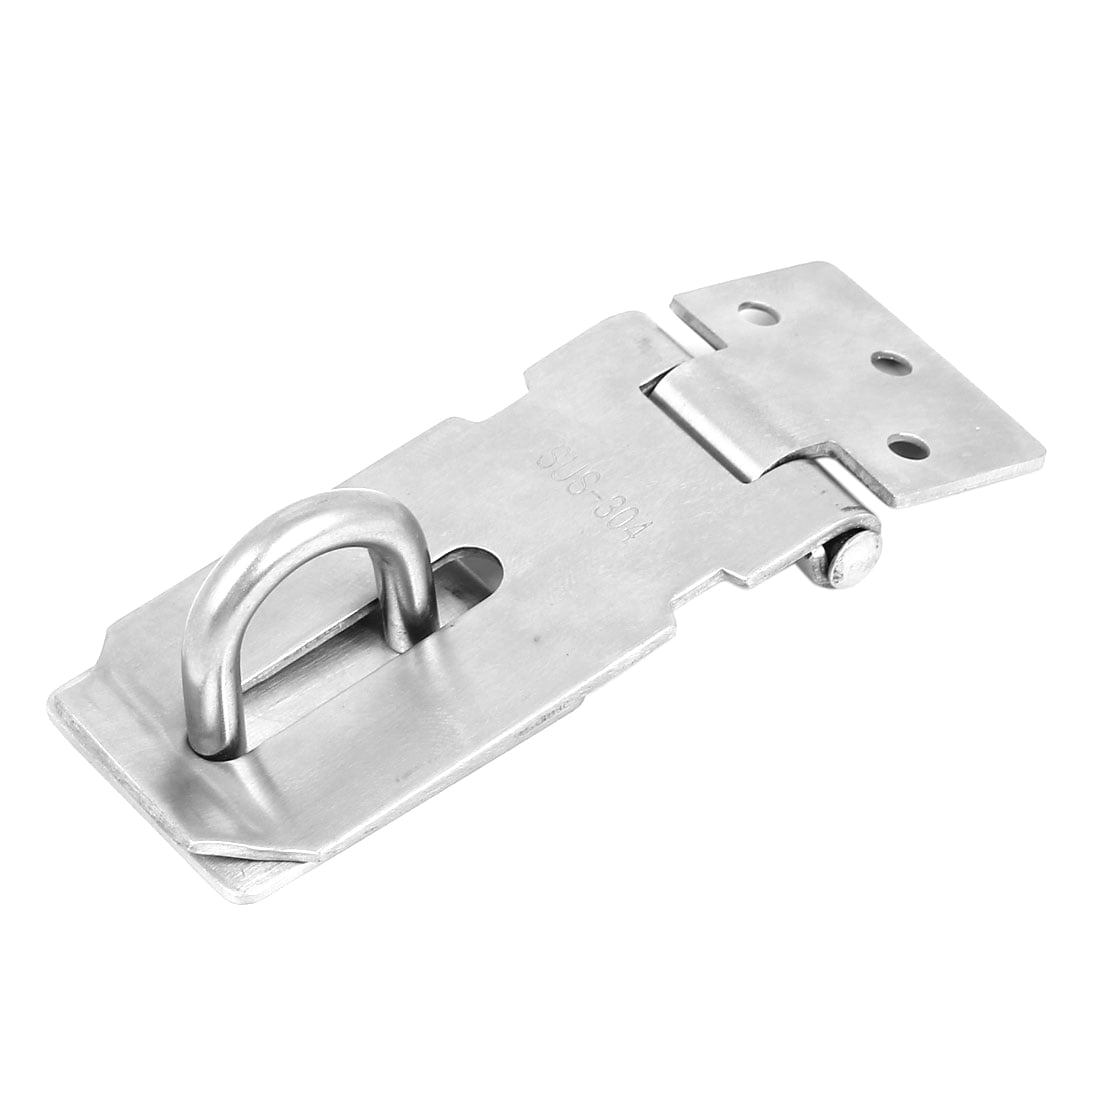 Home 304 Stainless Steel Hasp Staple Safety Door Bolt Latches for ...